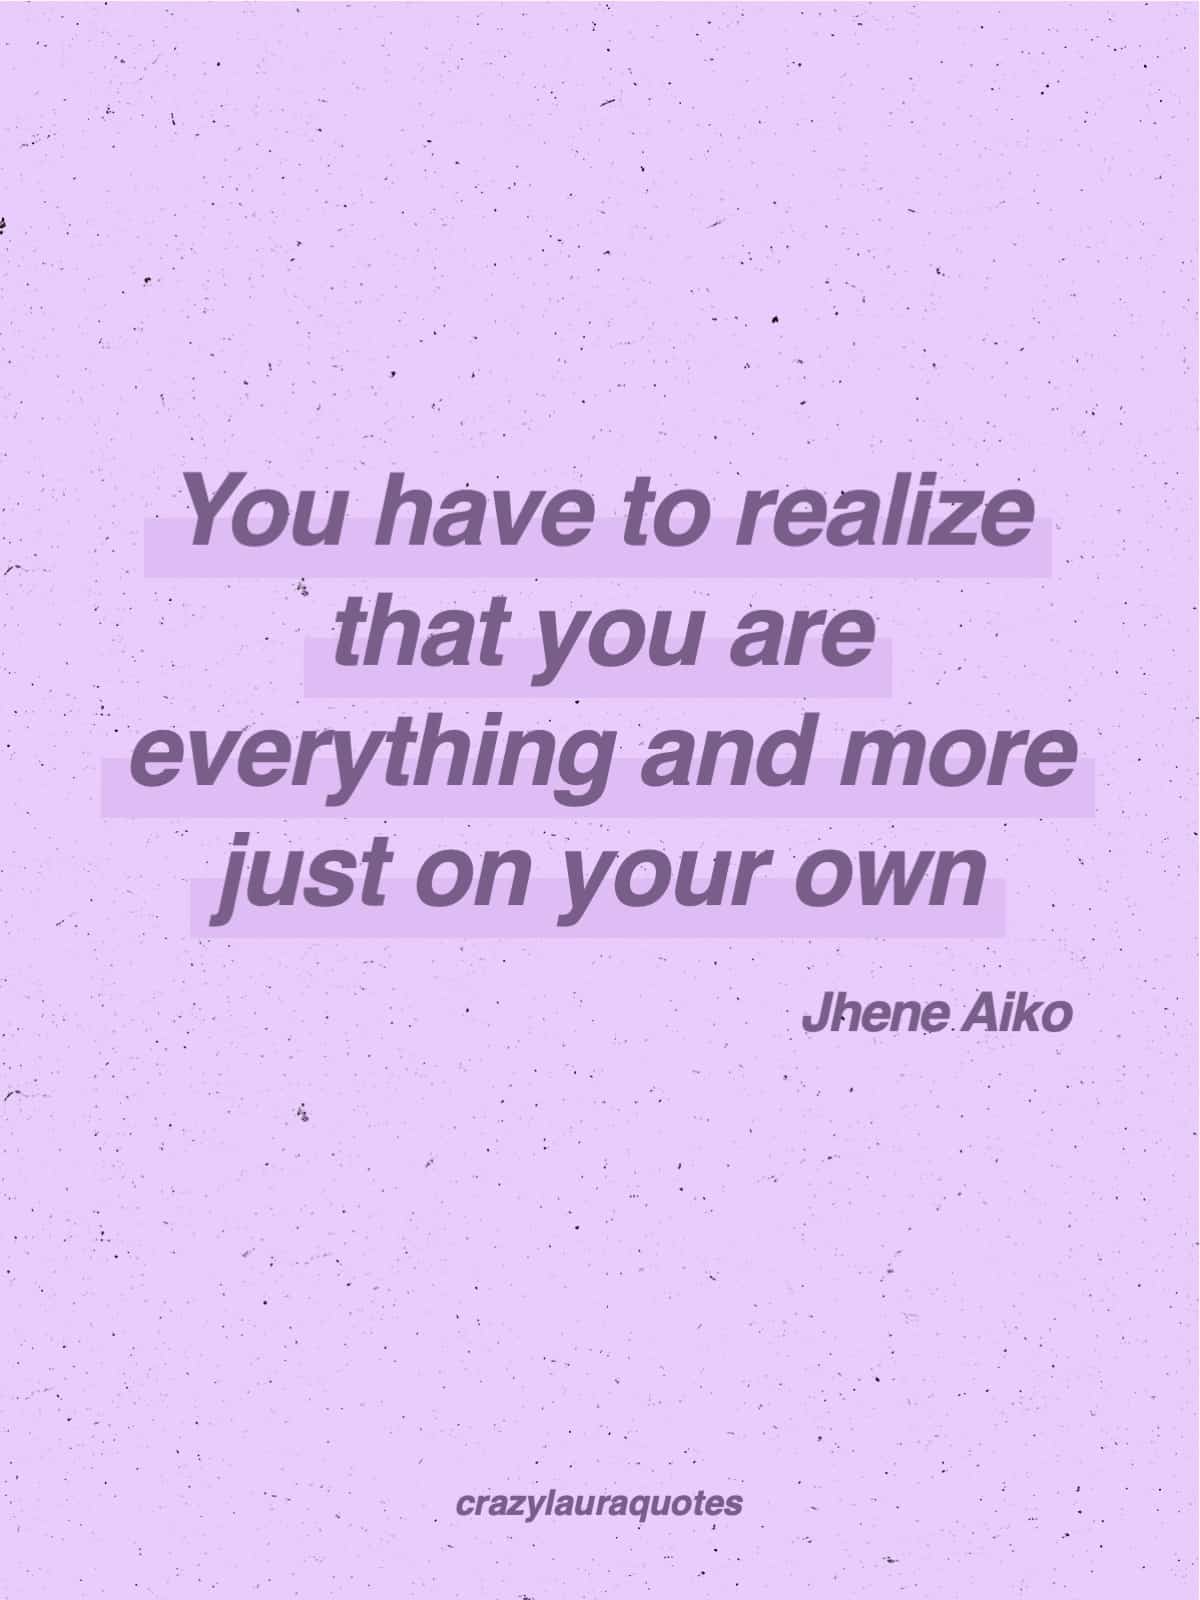 43+ Best Jhene Aiko Quotes On Life & Love Crazy Laura Quotes